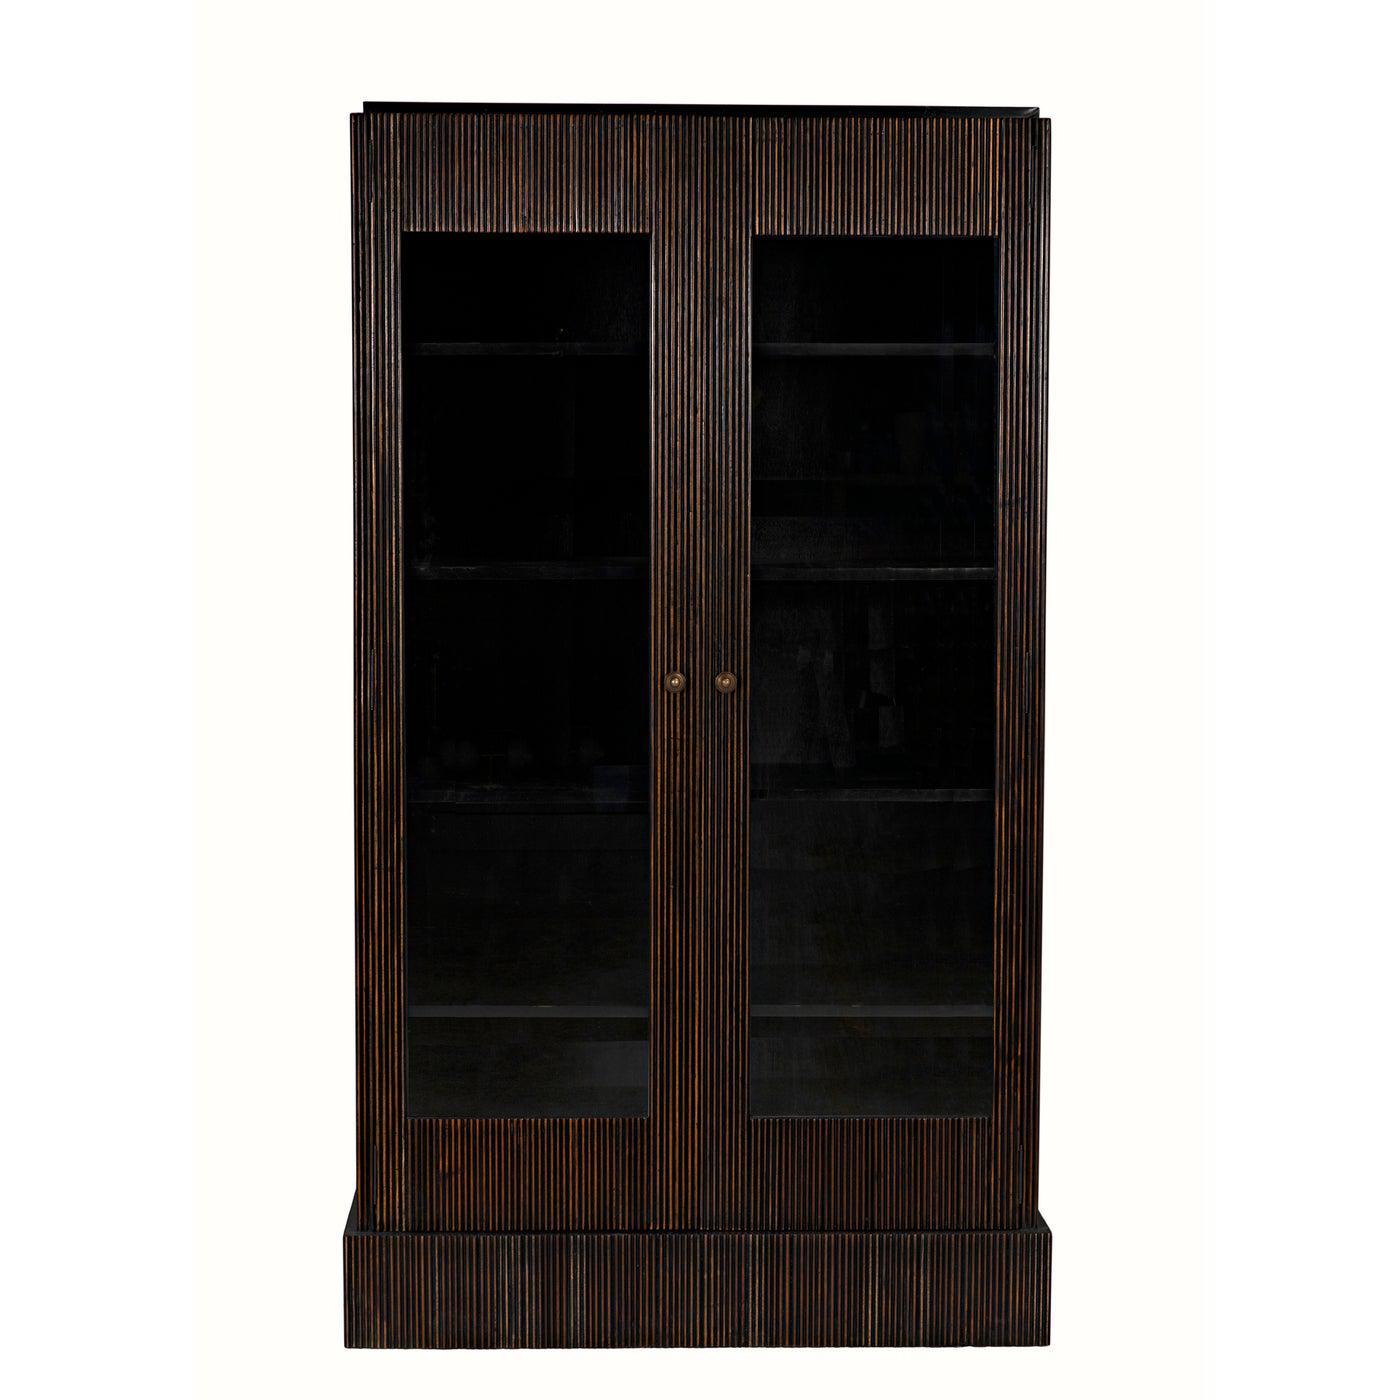 Noho Hutch, Hand Rubbed Black with Light Brown Trim-Noir Furniture-Blue Hand Home